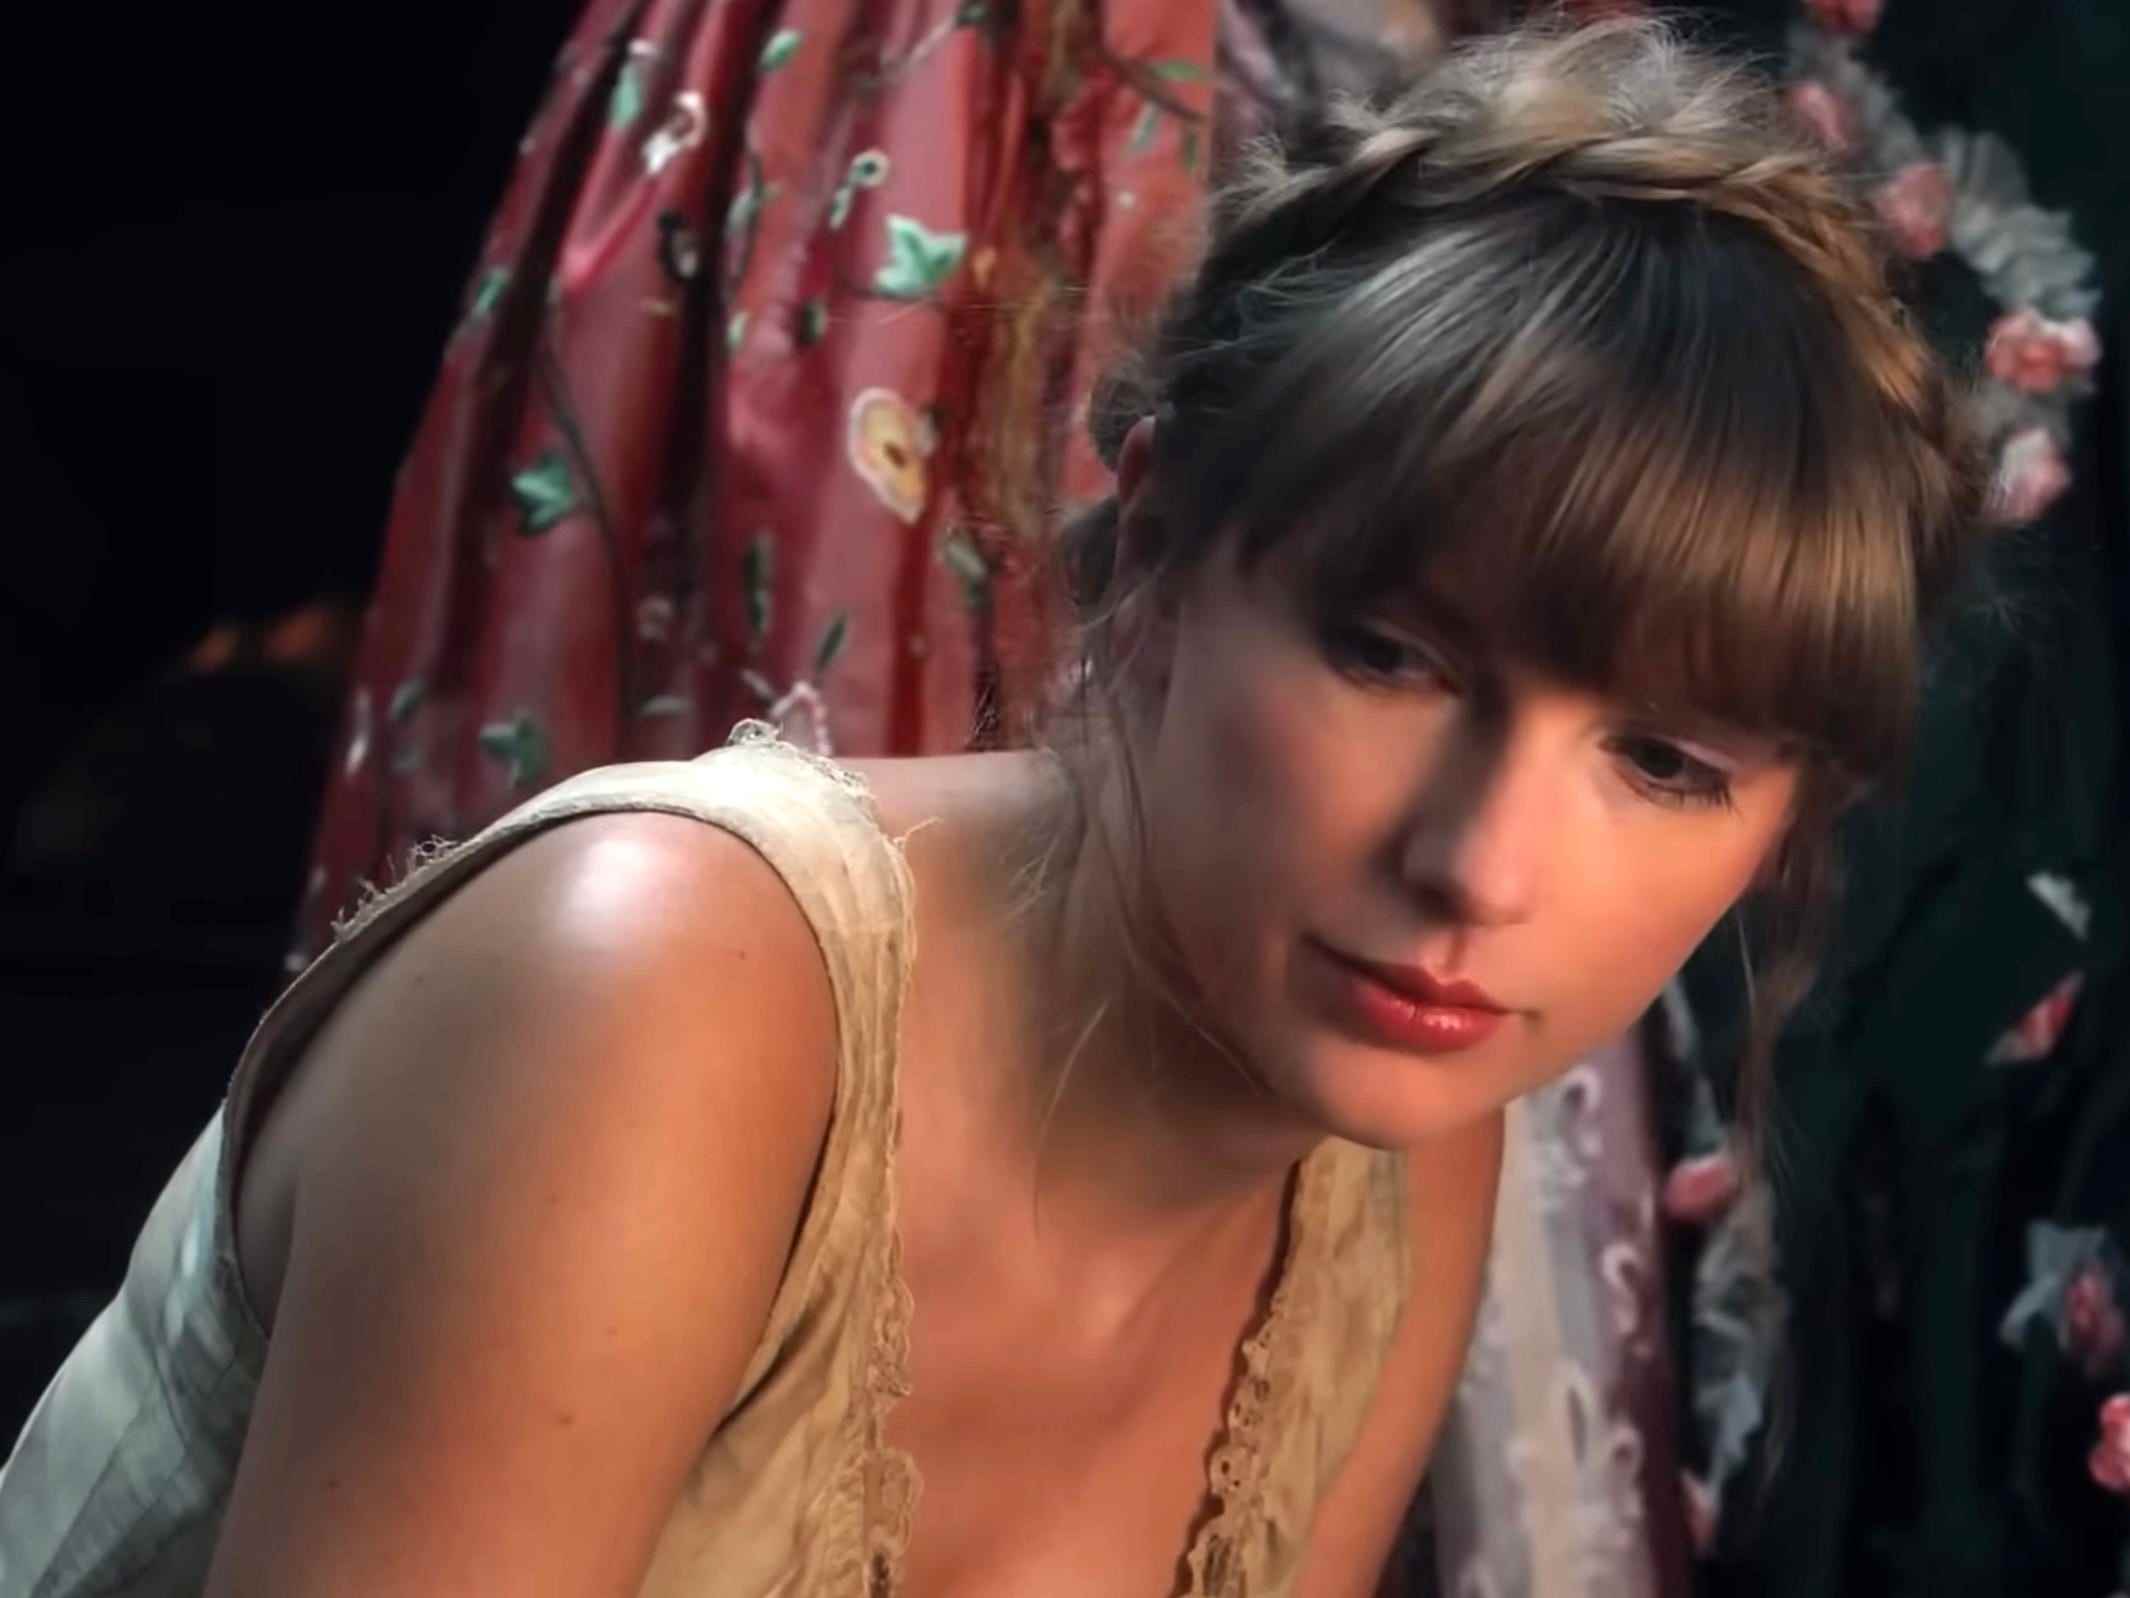 Taylor Swift Bejeweled Musikvideo